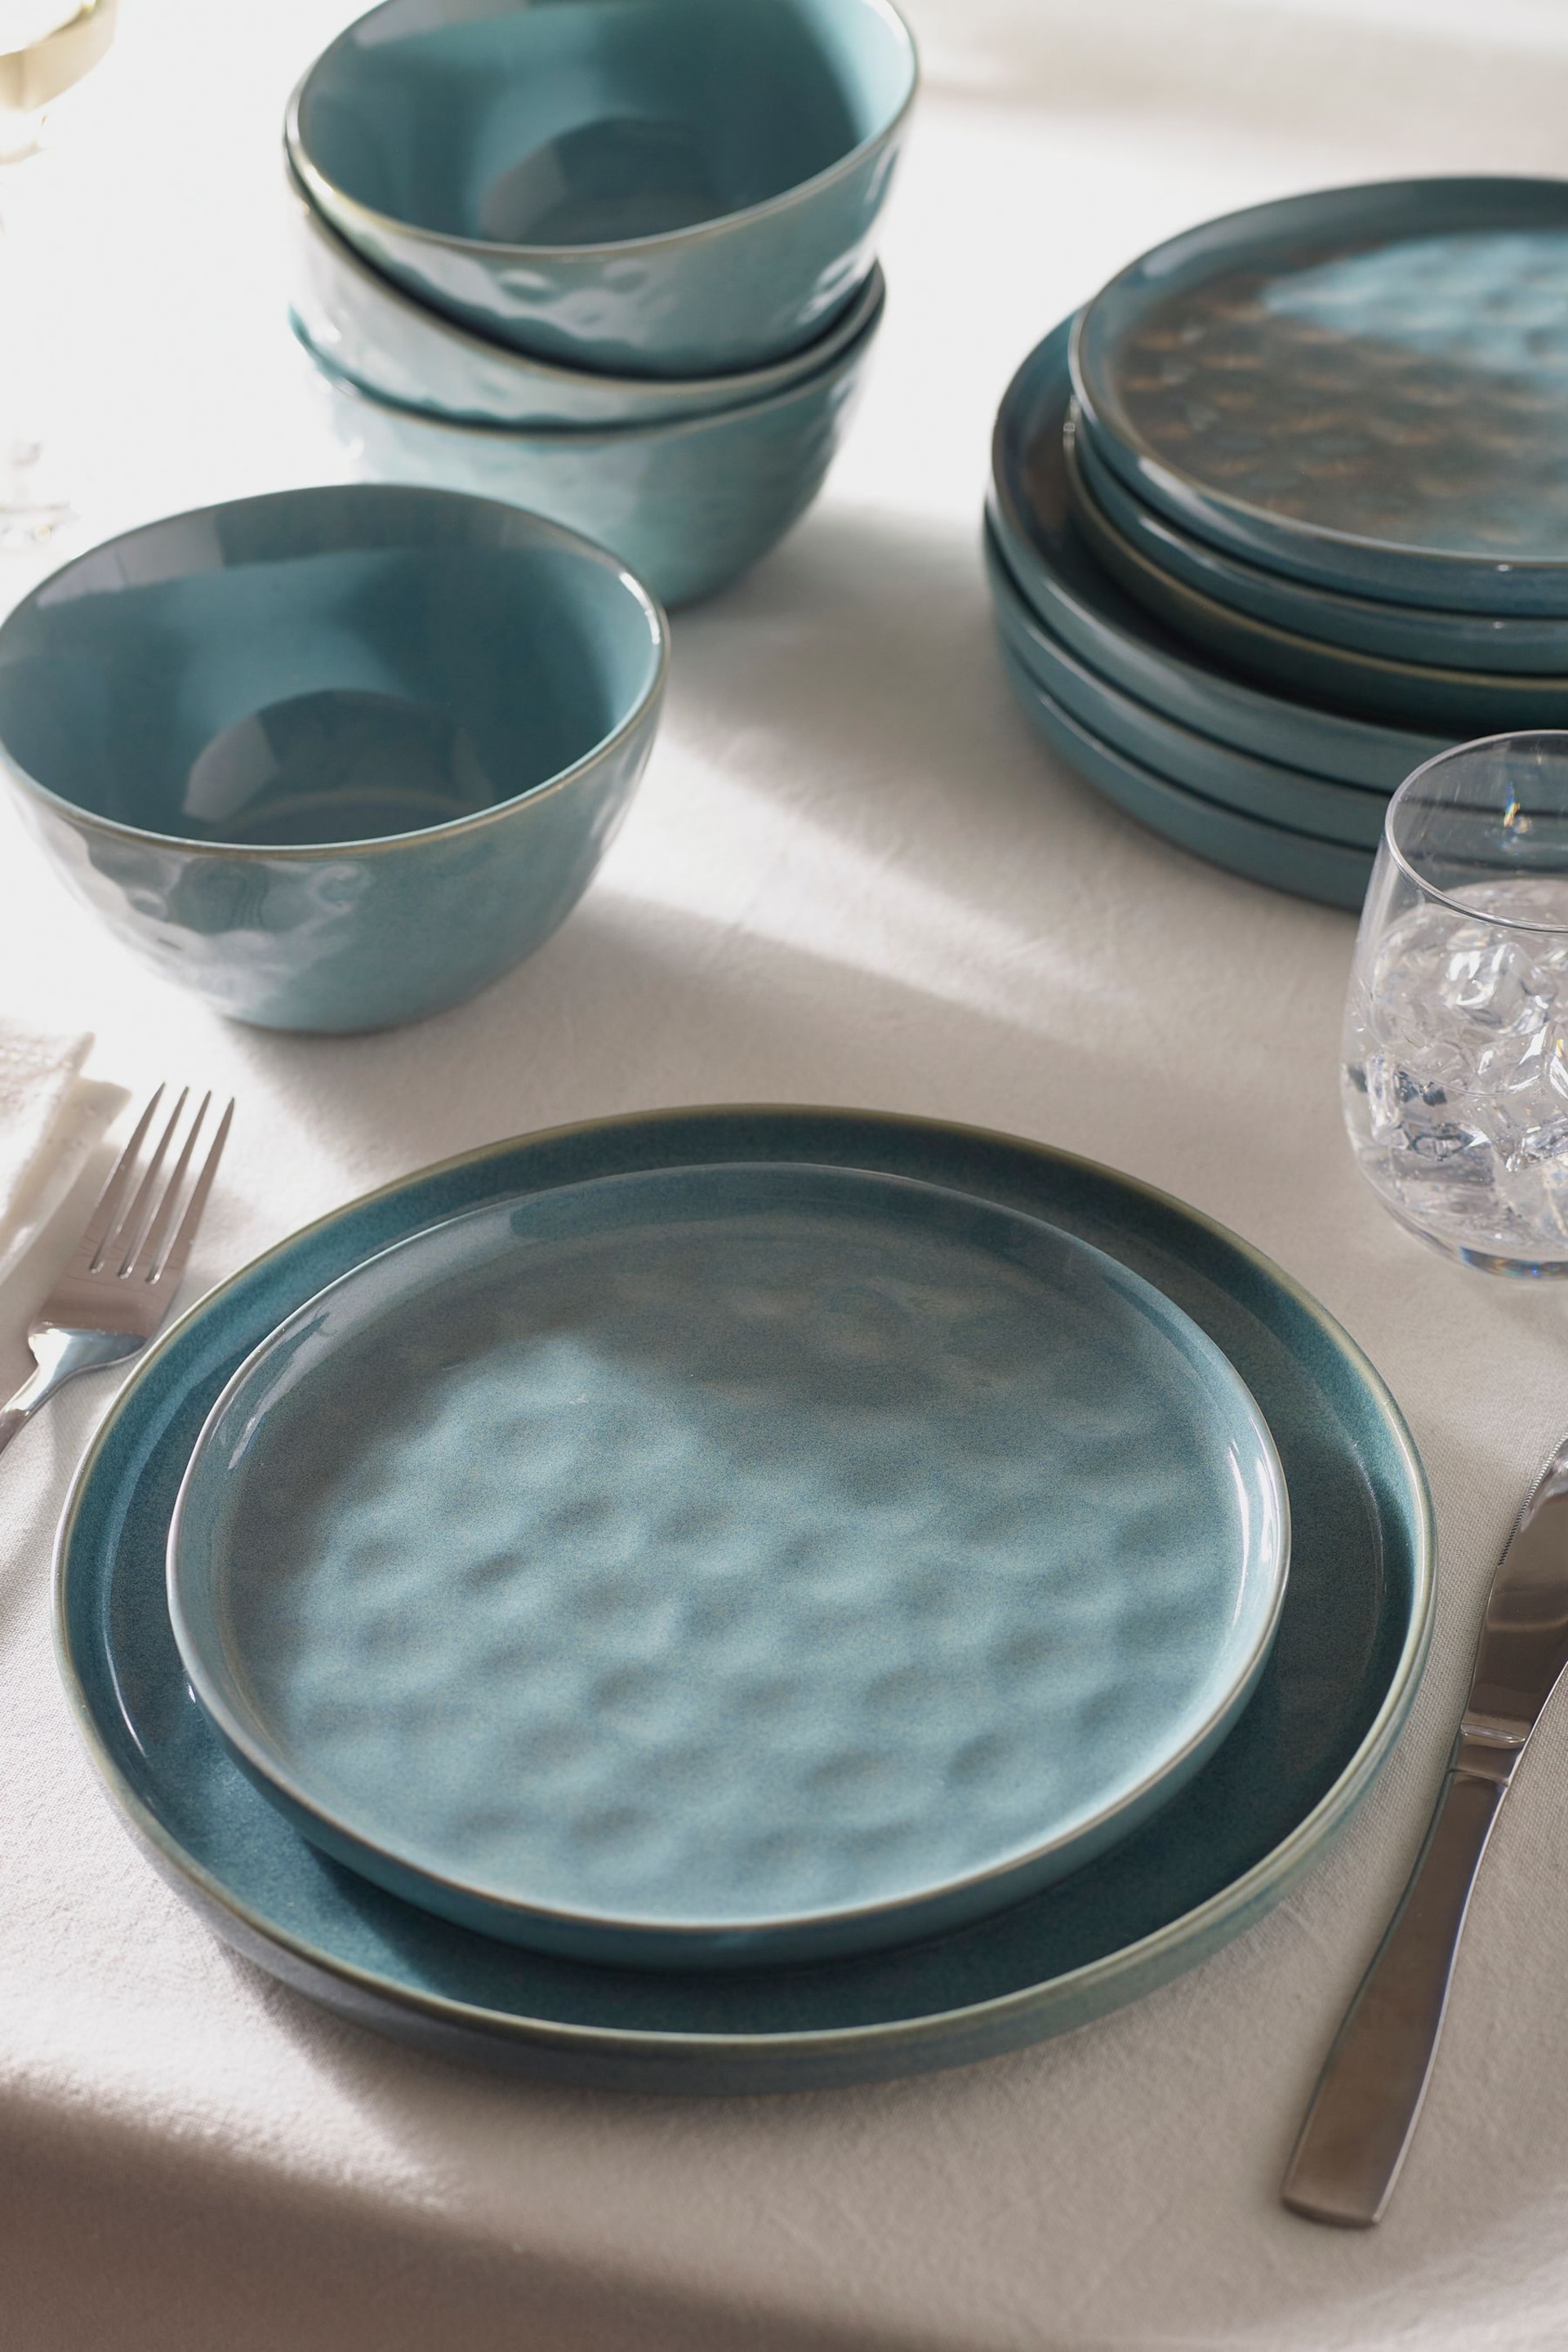 Teal Blue Willow 12 Piece Dinner Set - Image 1 of 3